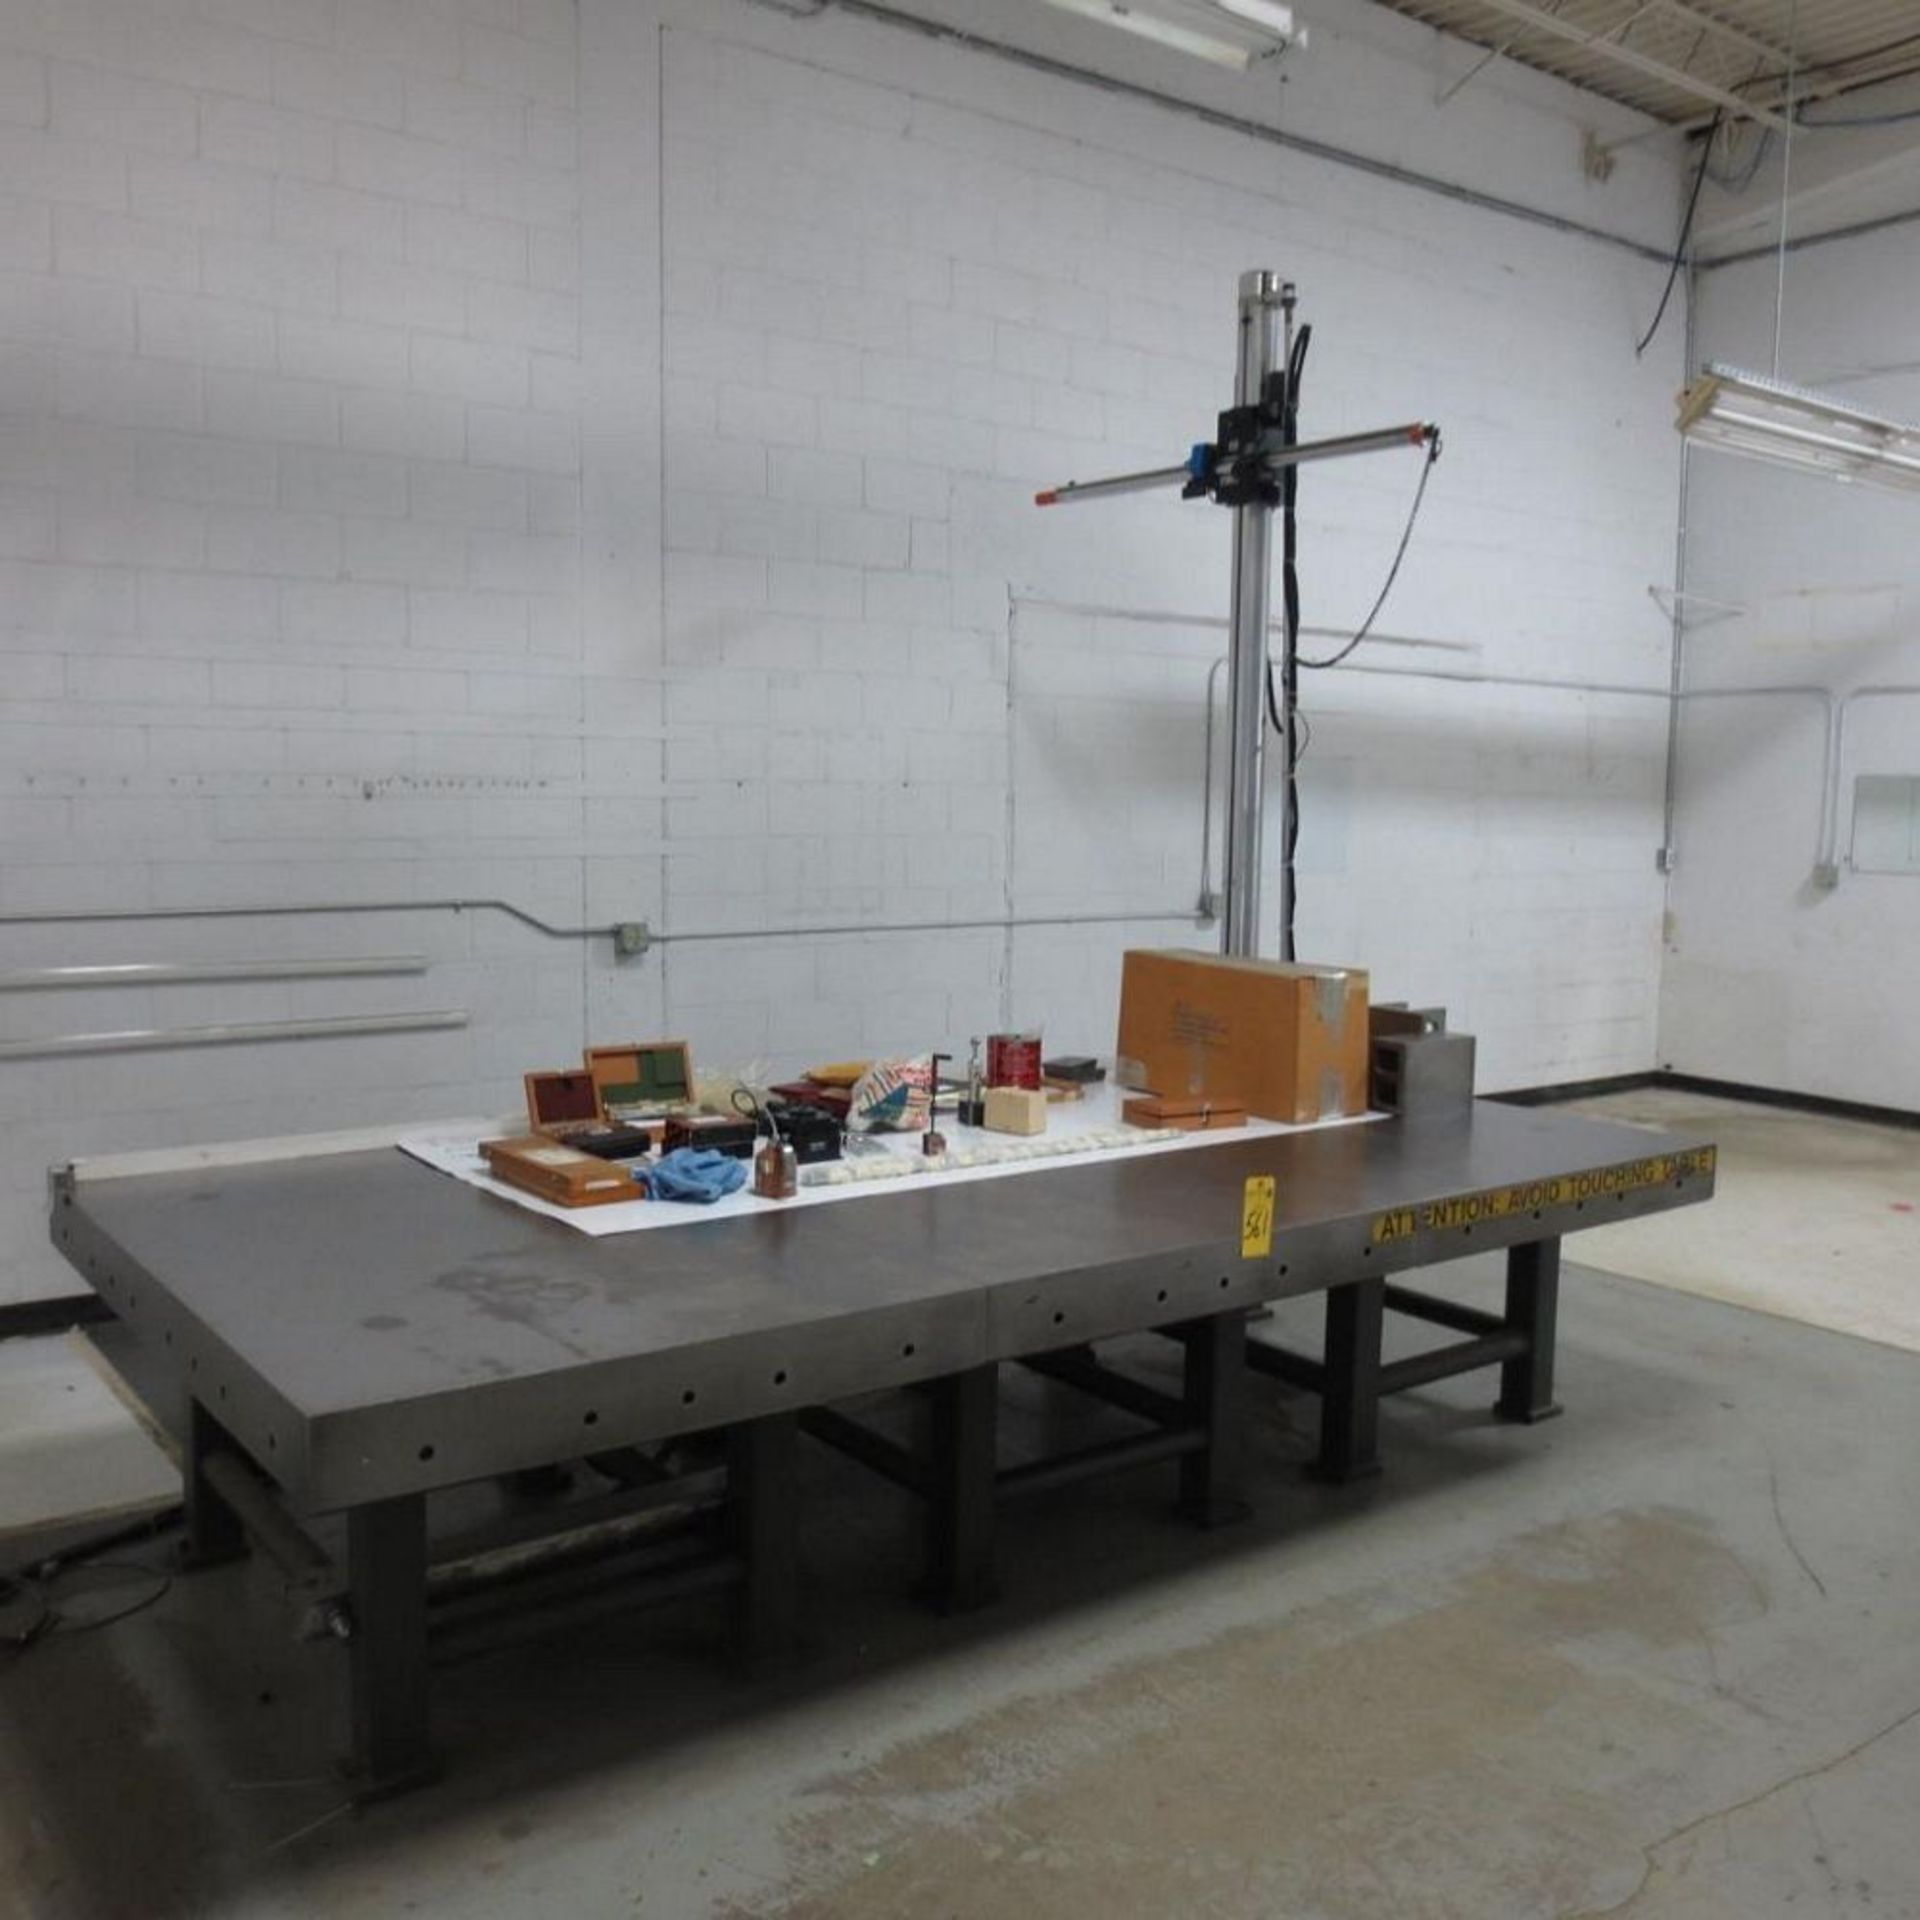 CMM Horizontal Arm Measuring Marching, 141 3/4" X 68" Table Work Area, Model 72A, Year 1992, S/N 792